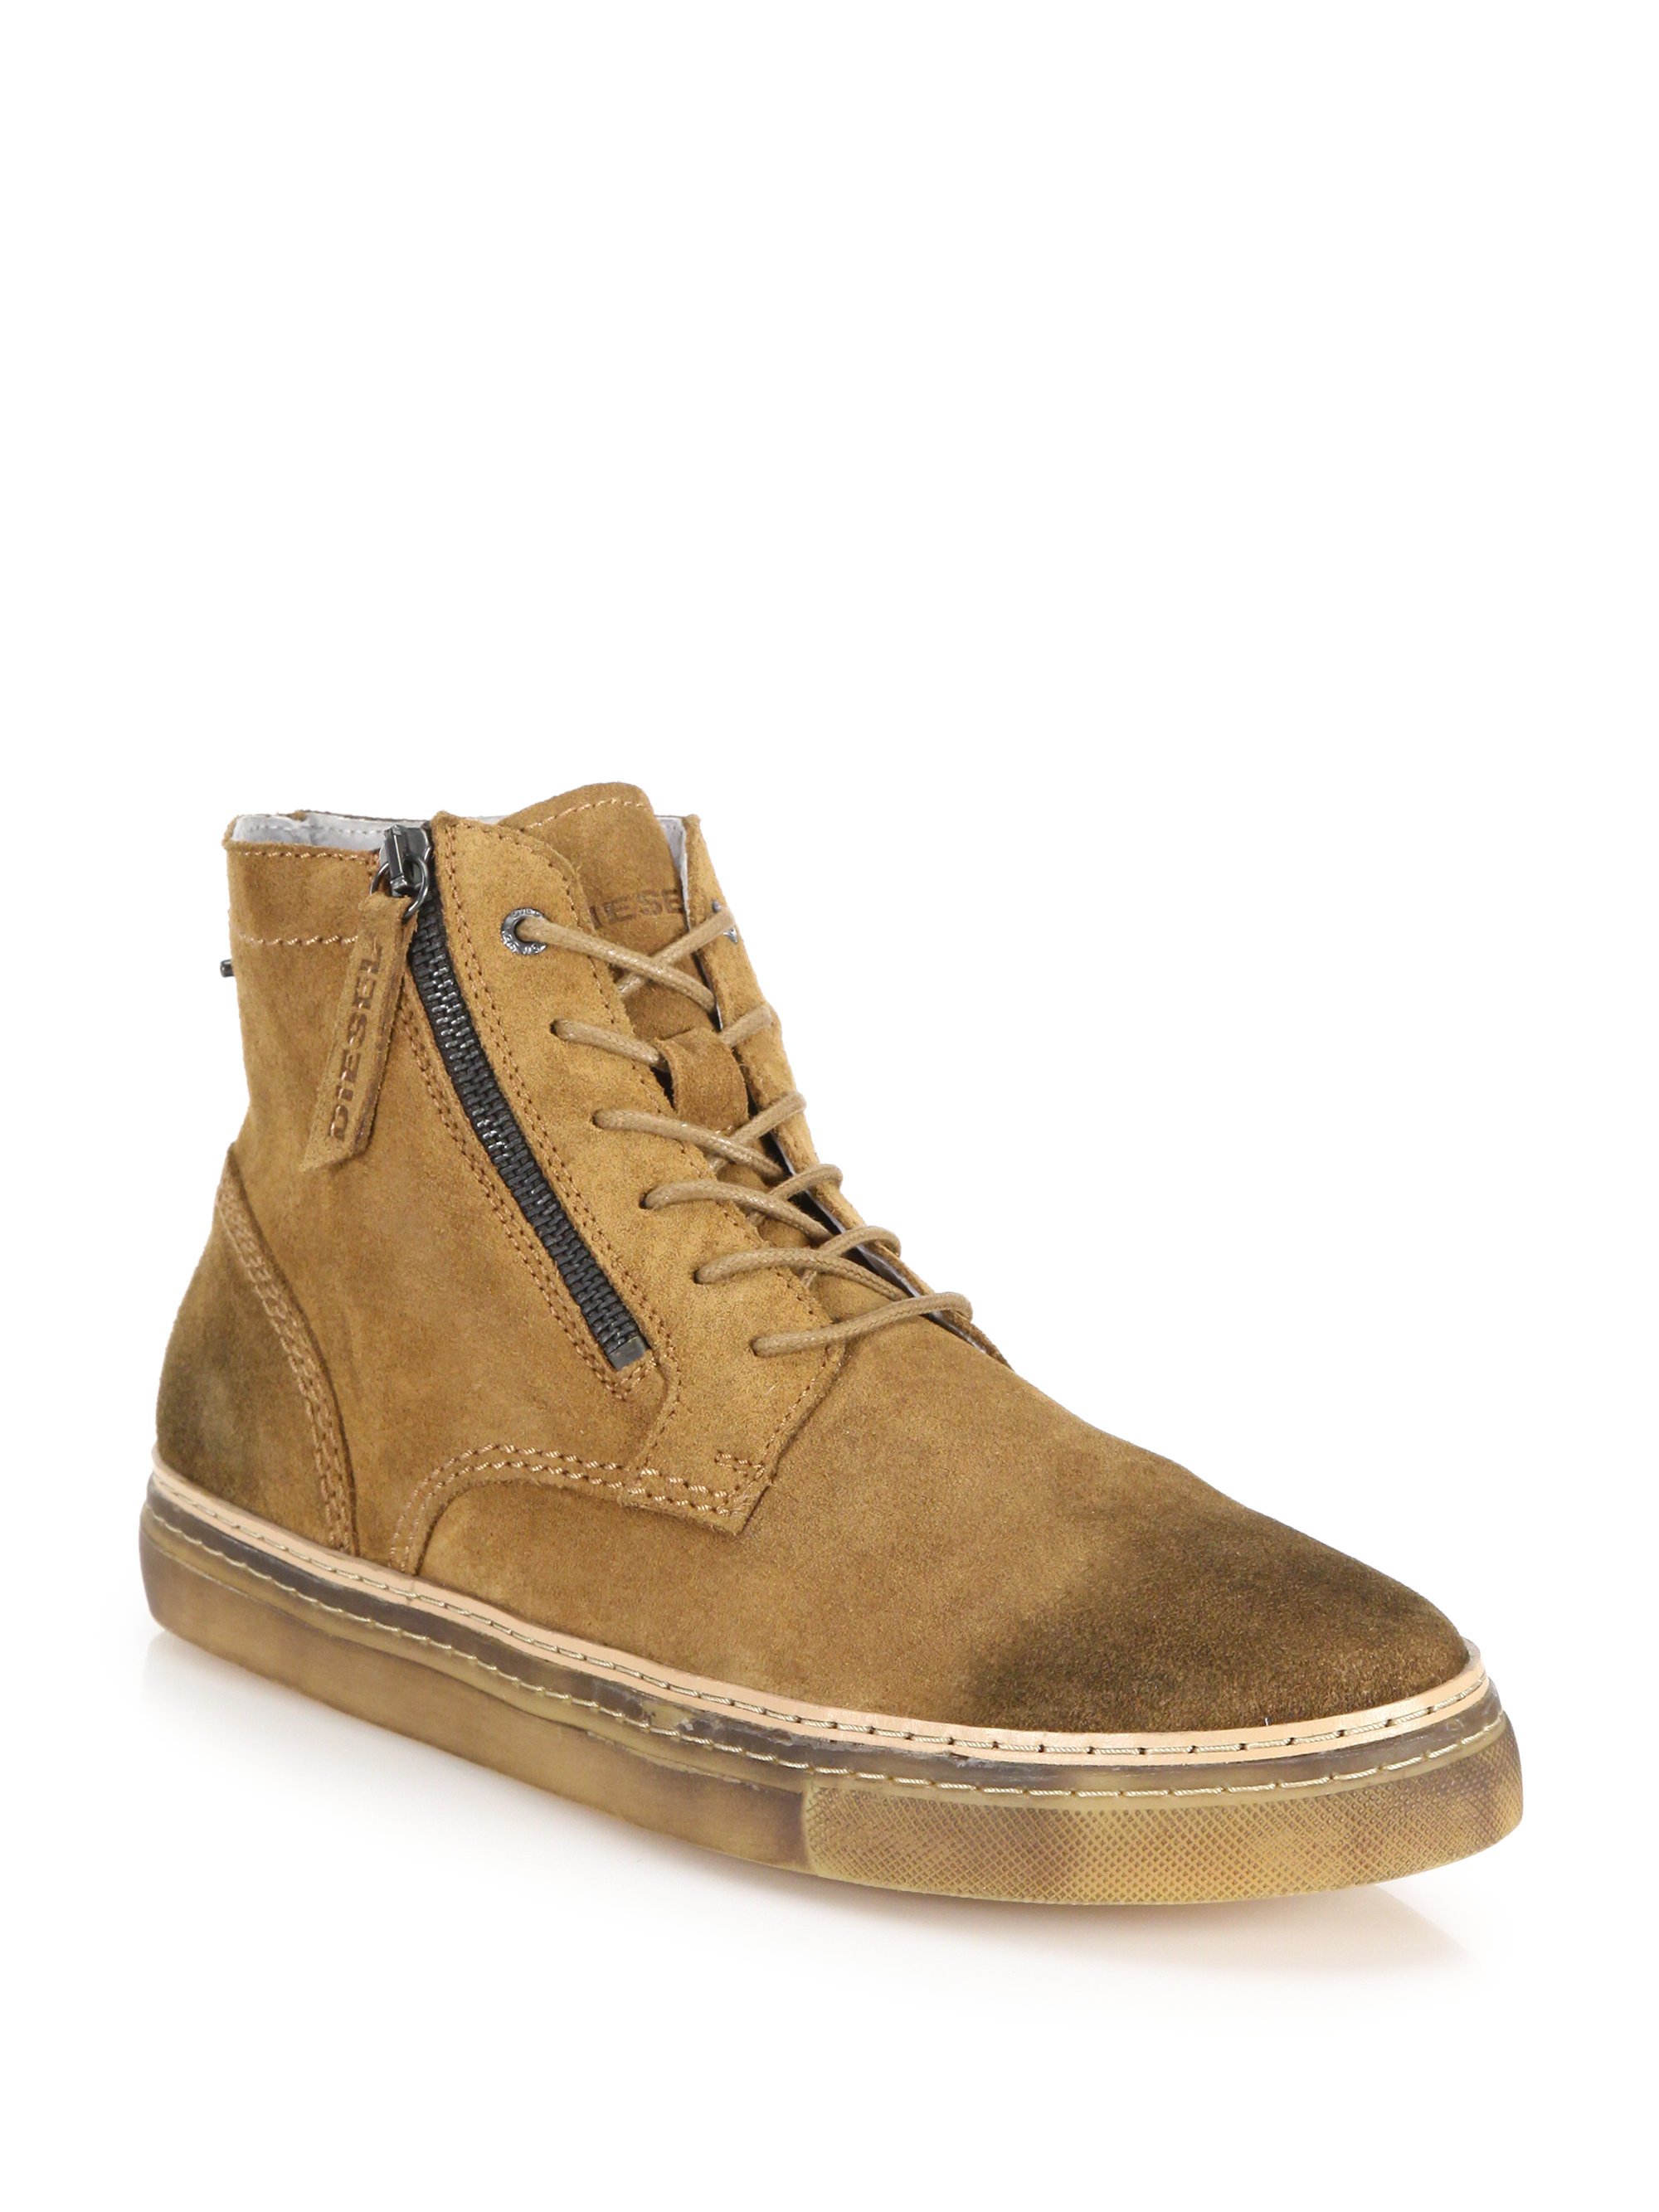 DIESEL Lace-Up Suede Boots in Brown for Men - Lyst